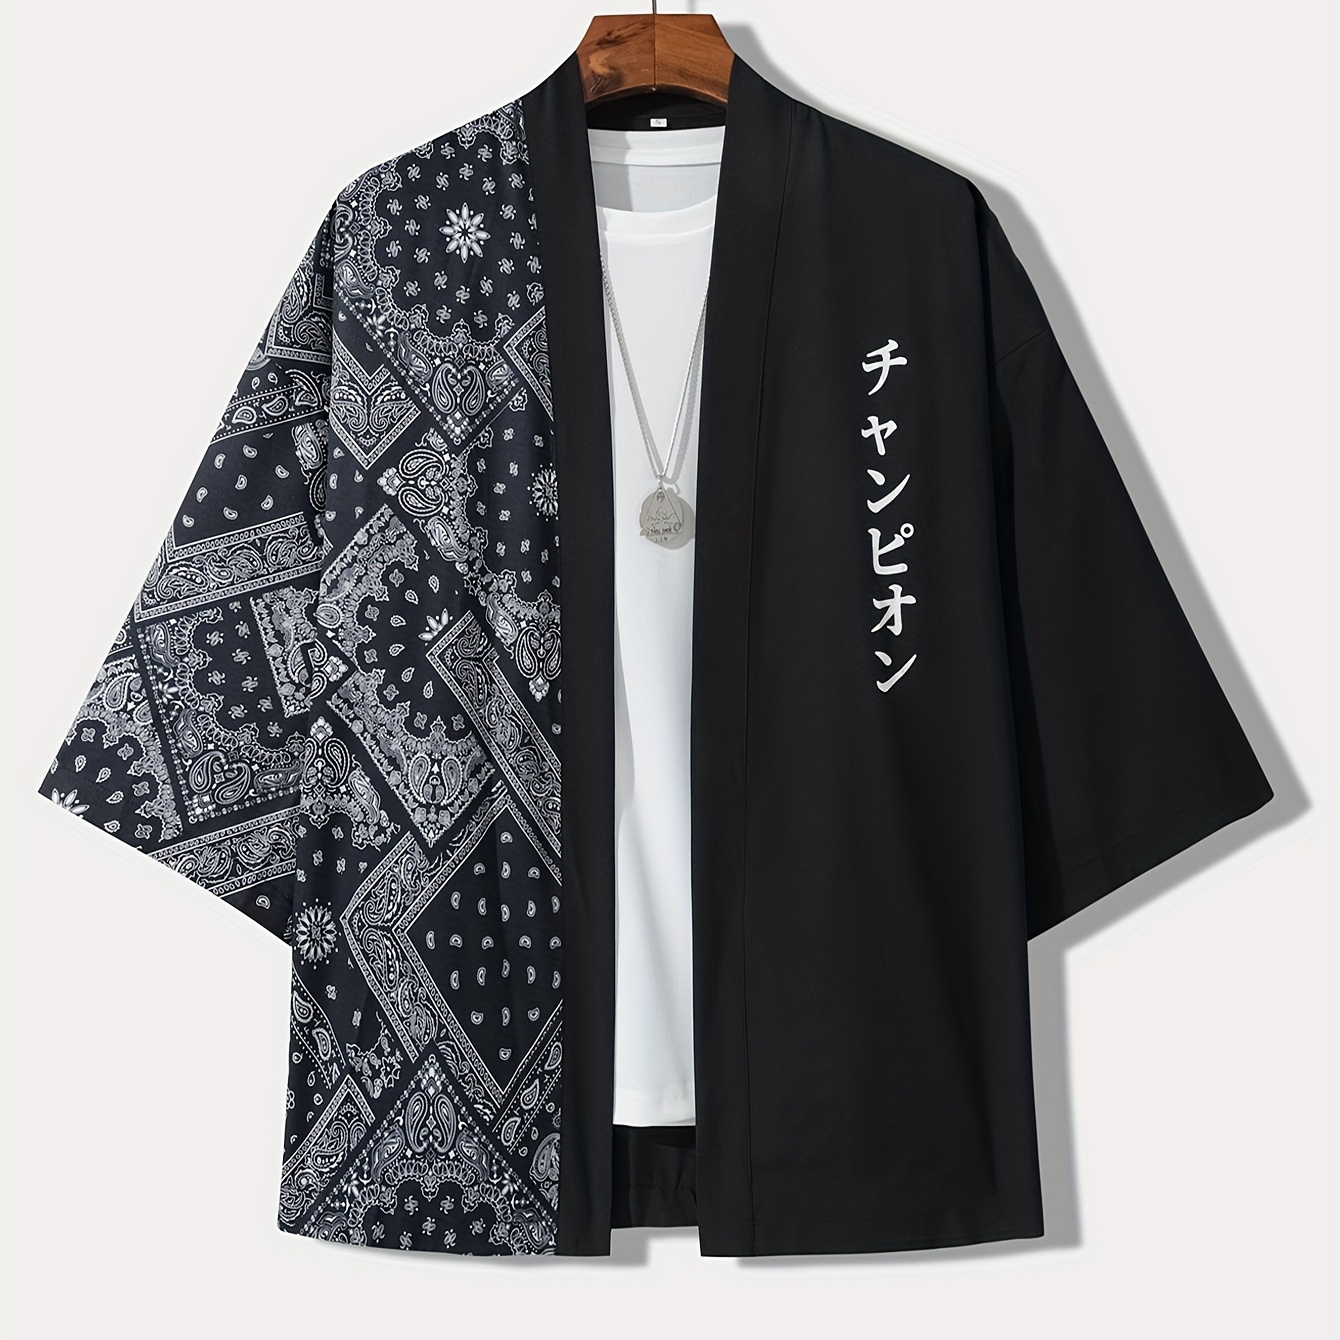 

Men's Casual Kimono Style Paisley & Japanese Letter Print Loose Fit Open Front Shirt, Men's Clothes For Summer Vacation Resort Photograph